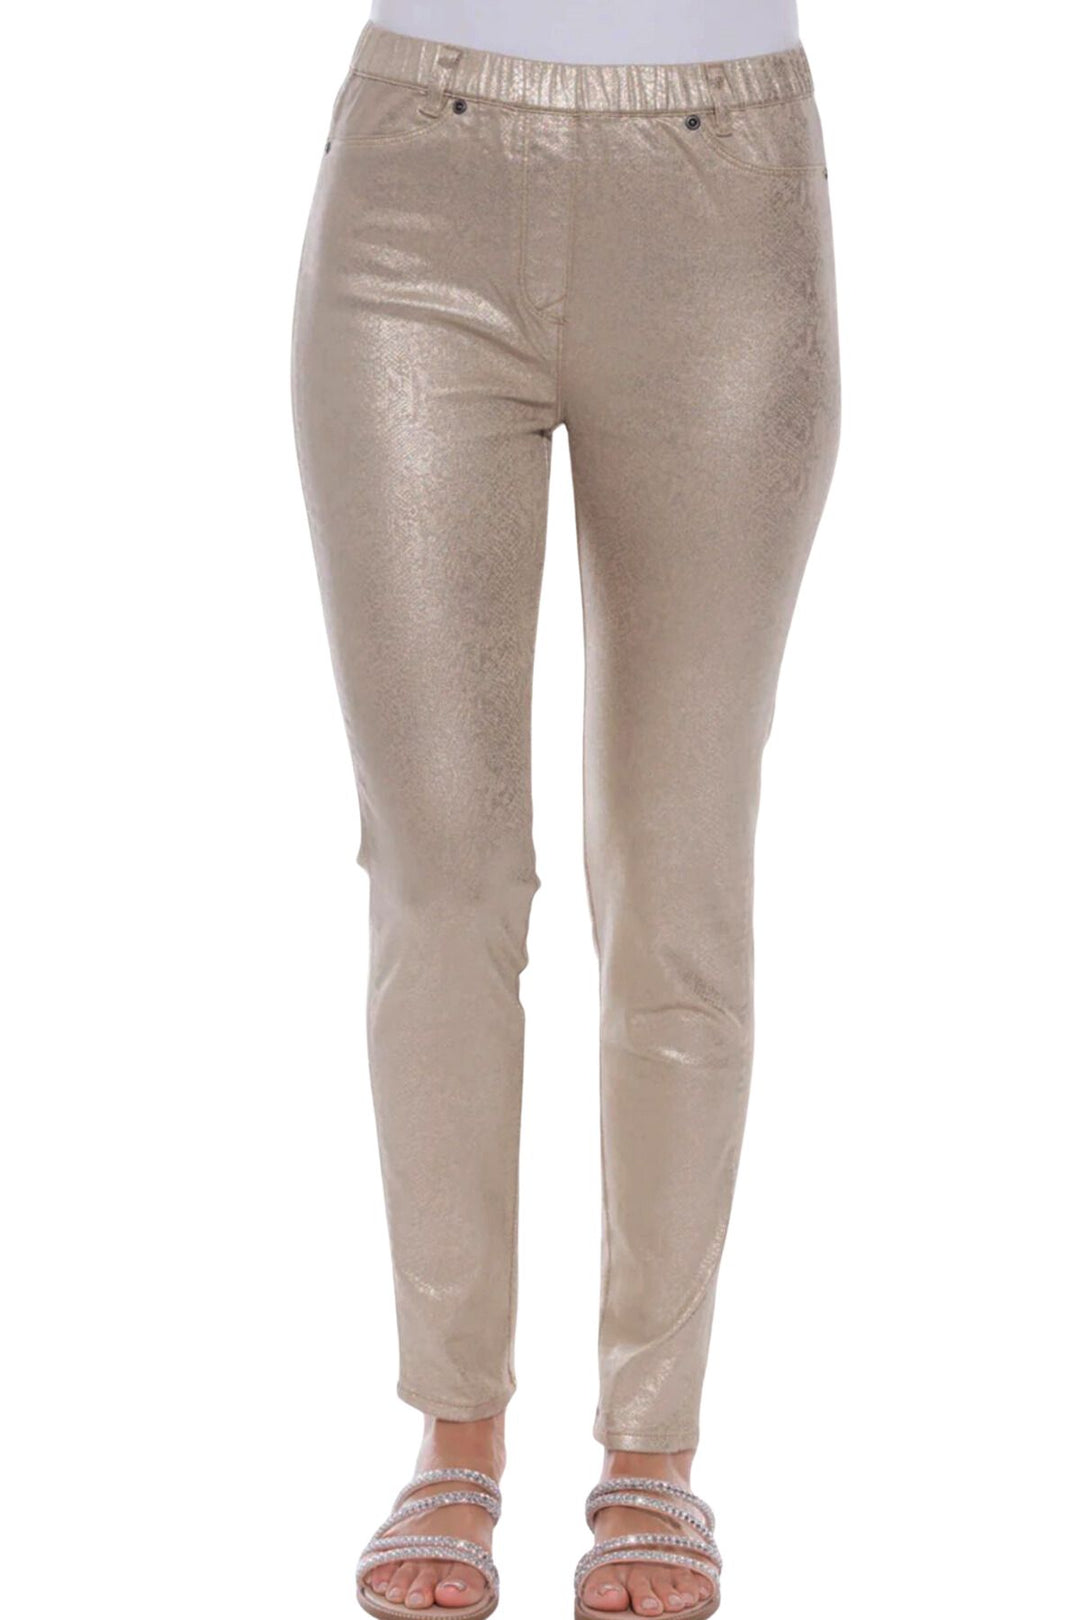 woman wearing gold foil pants by Cafe Late clothing, sold and shipped from Pizazz Boutique online women's clothes shops Australia